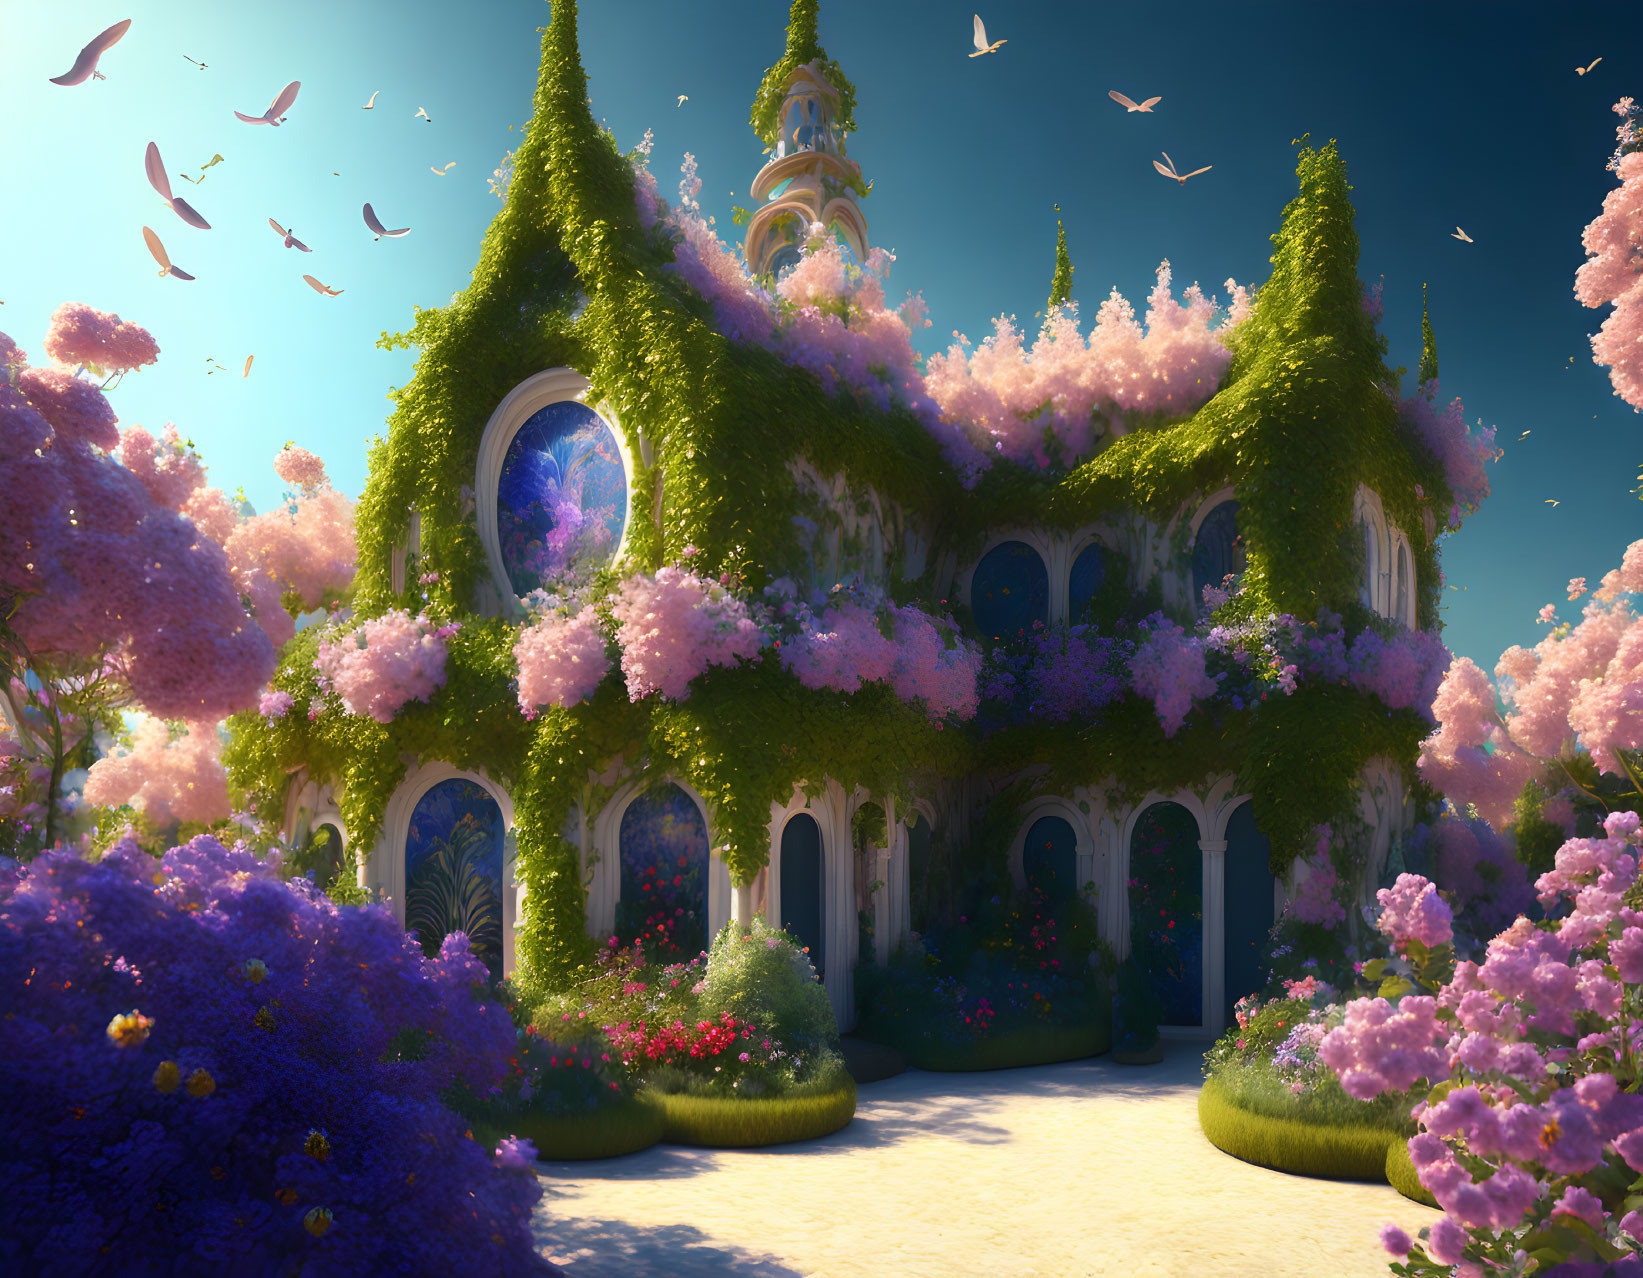 Fantastical castle with ivy, pink flowers, blue sky, and flying birds